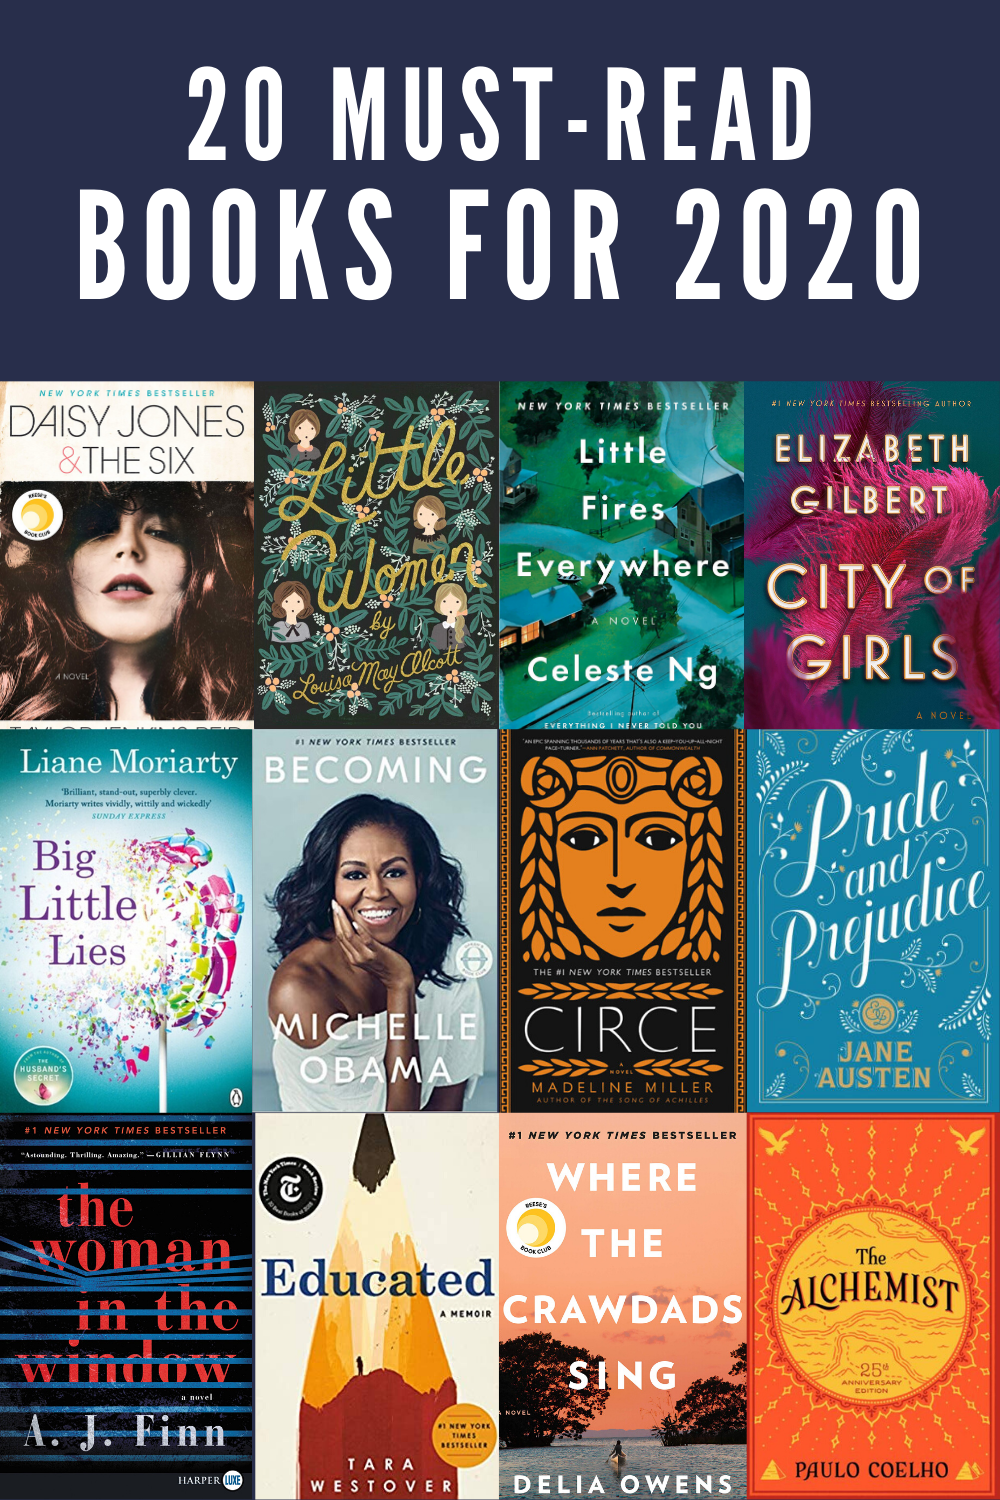 Books You Should Read in 2020